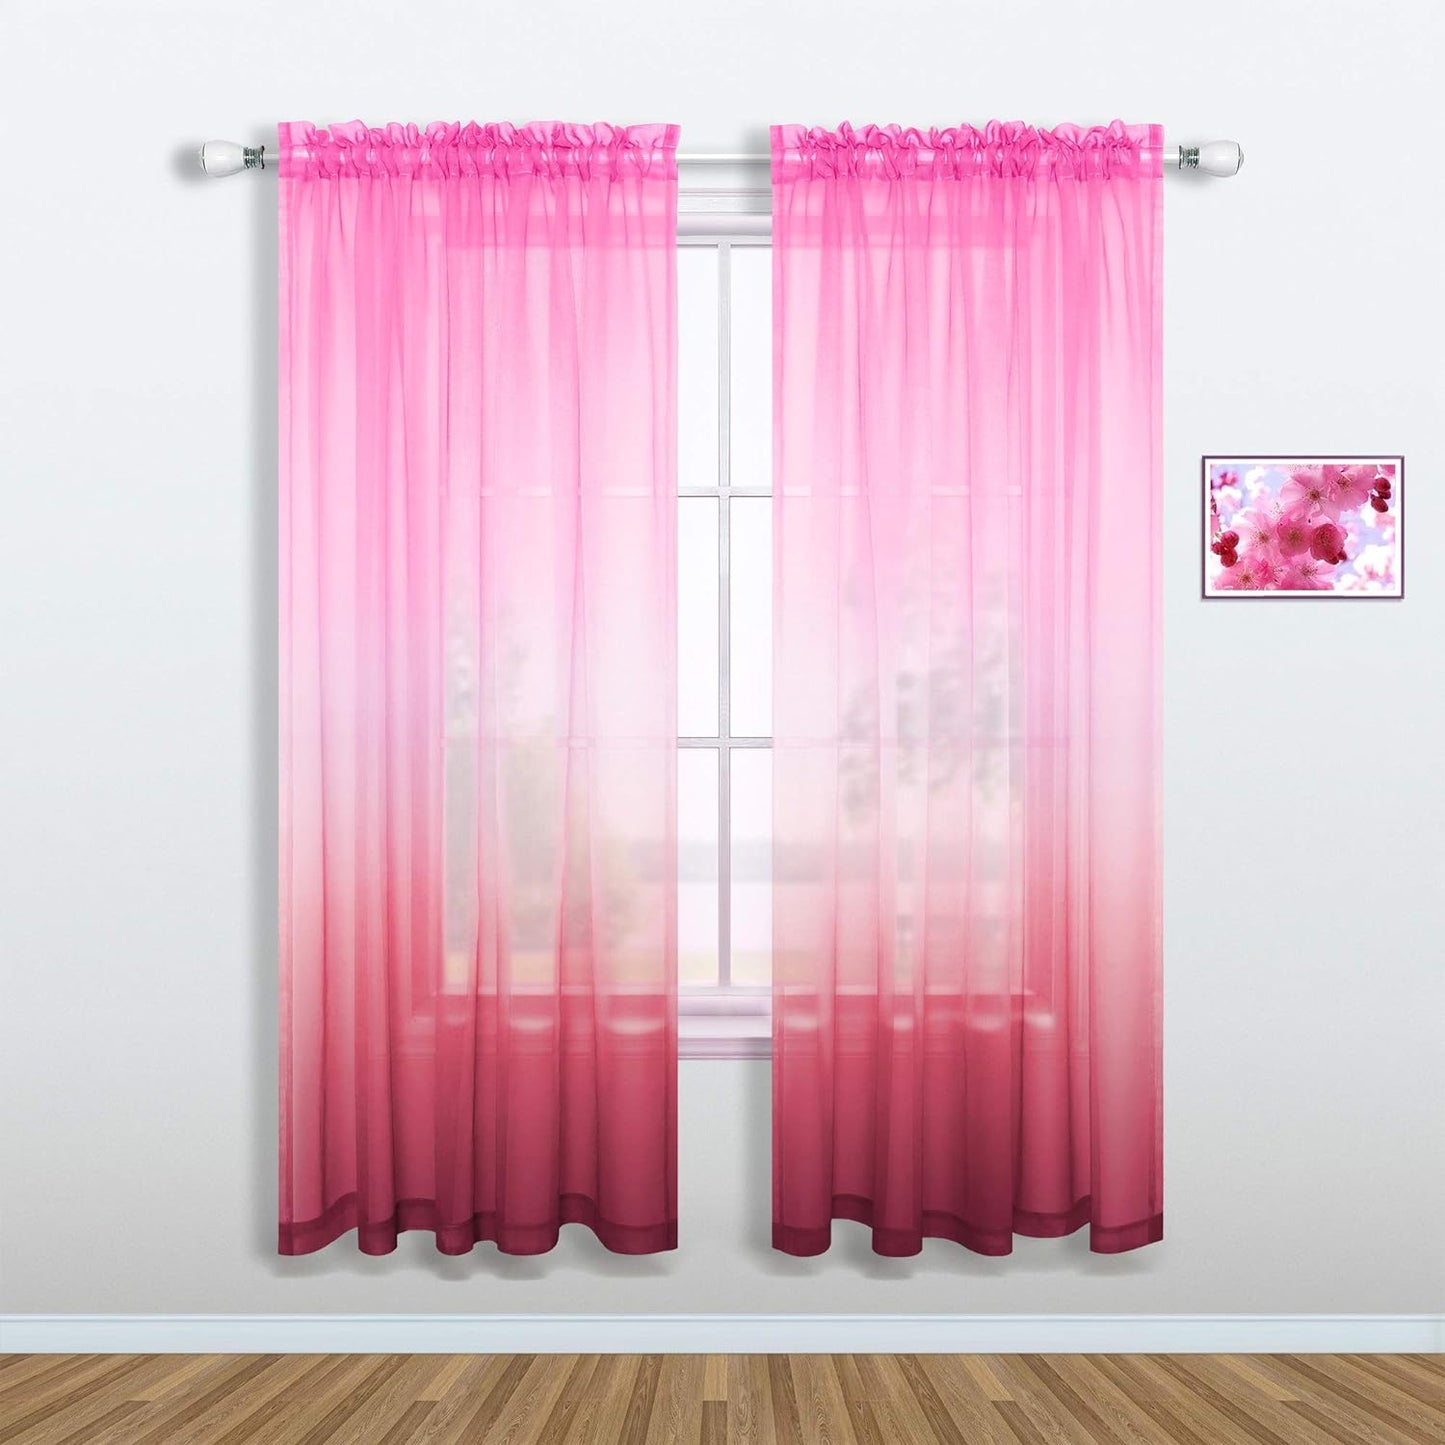 Pink and Purple Curtains for Girls Bedroom Decor Set 1 Single Panel Pocket Window Voile Pastel Sheer Ombre Rainbow Curtain for Kid Room Decoration Teen Princess 63 Inch Length Gradient Lilac Lavender  MRS.NATURALL TEXTILE Pink And Wildberry 52X63 